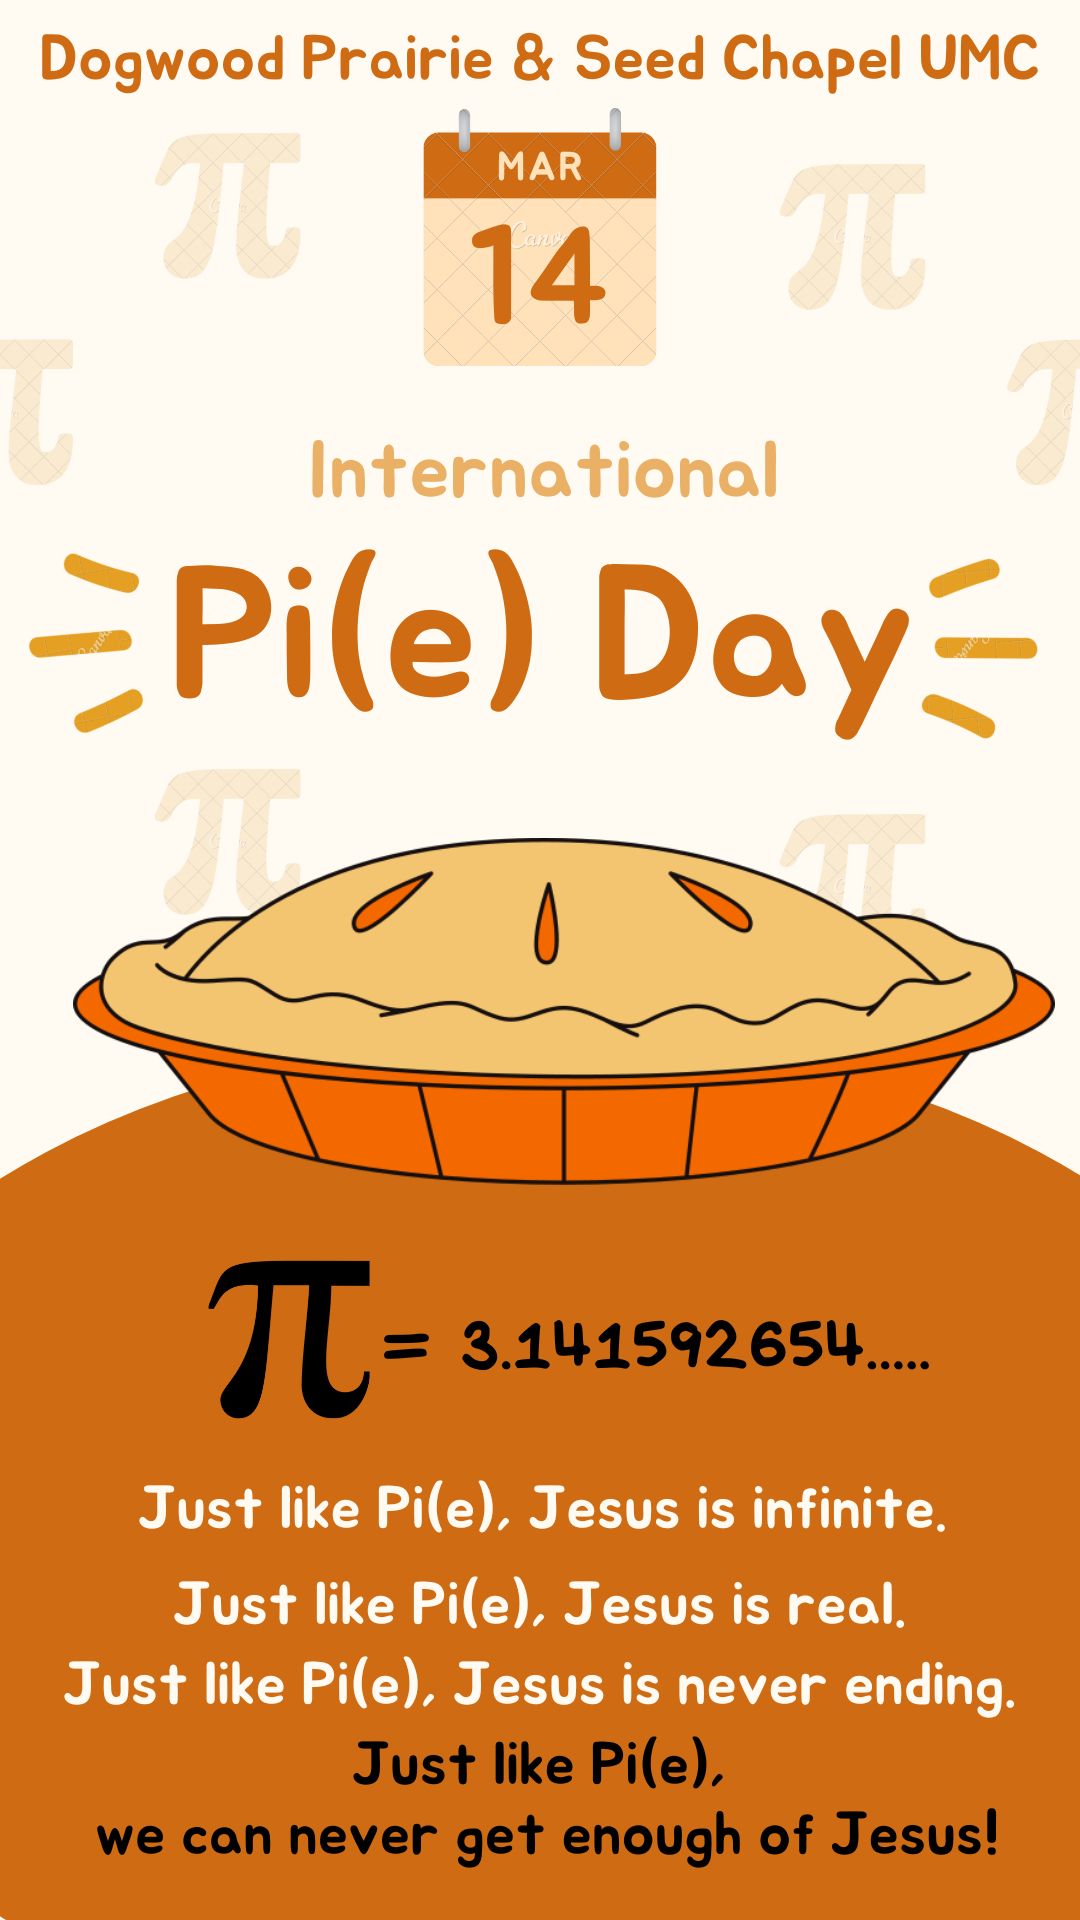 Pi(e) Day and the Bible